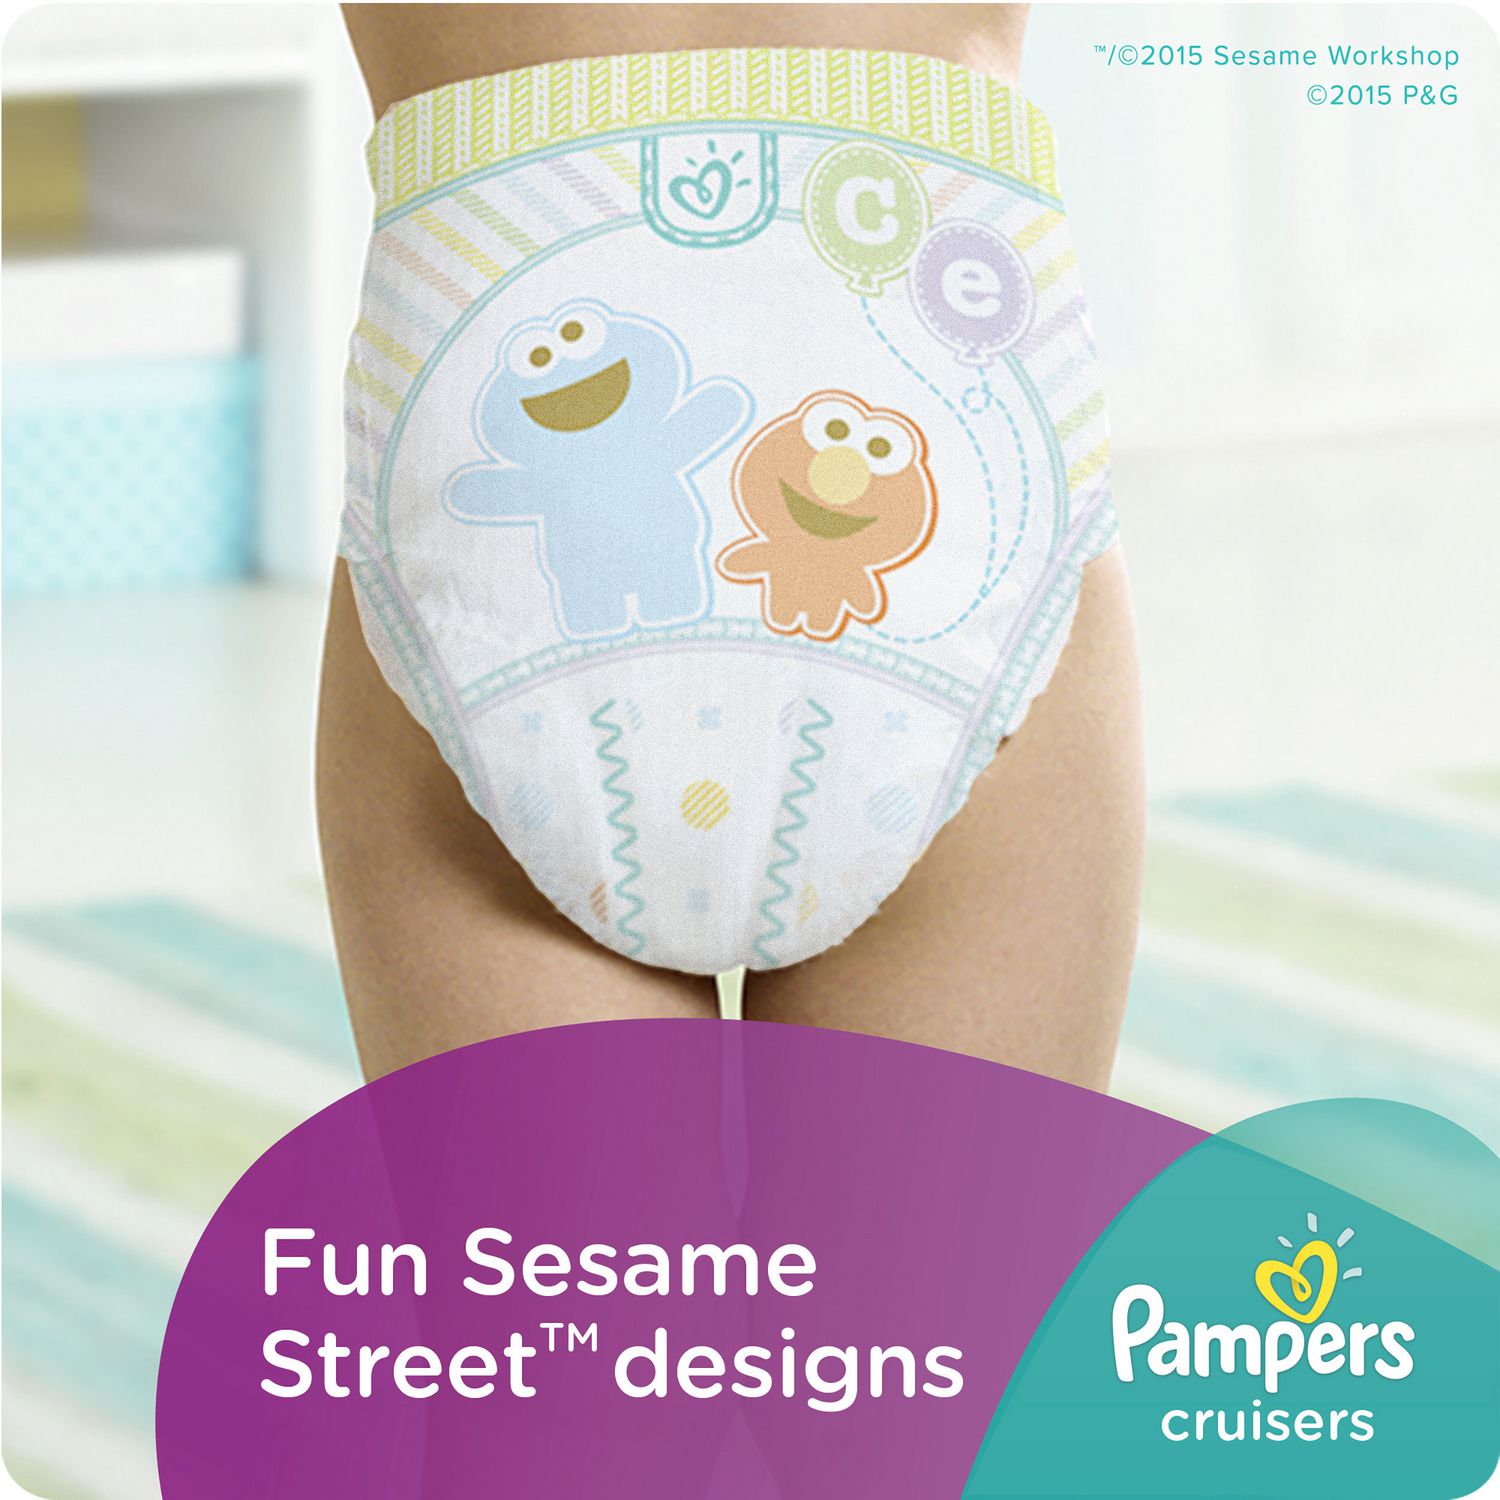 Couches Pampers Cruisers, taille 7 